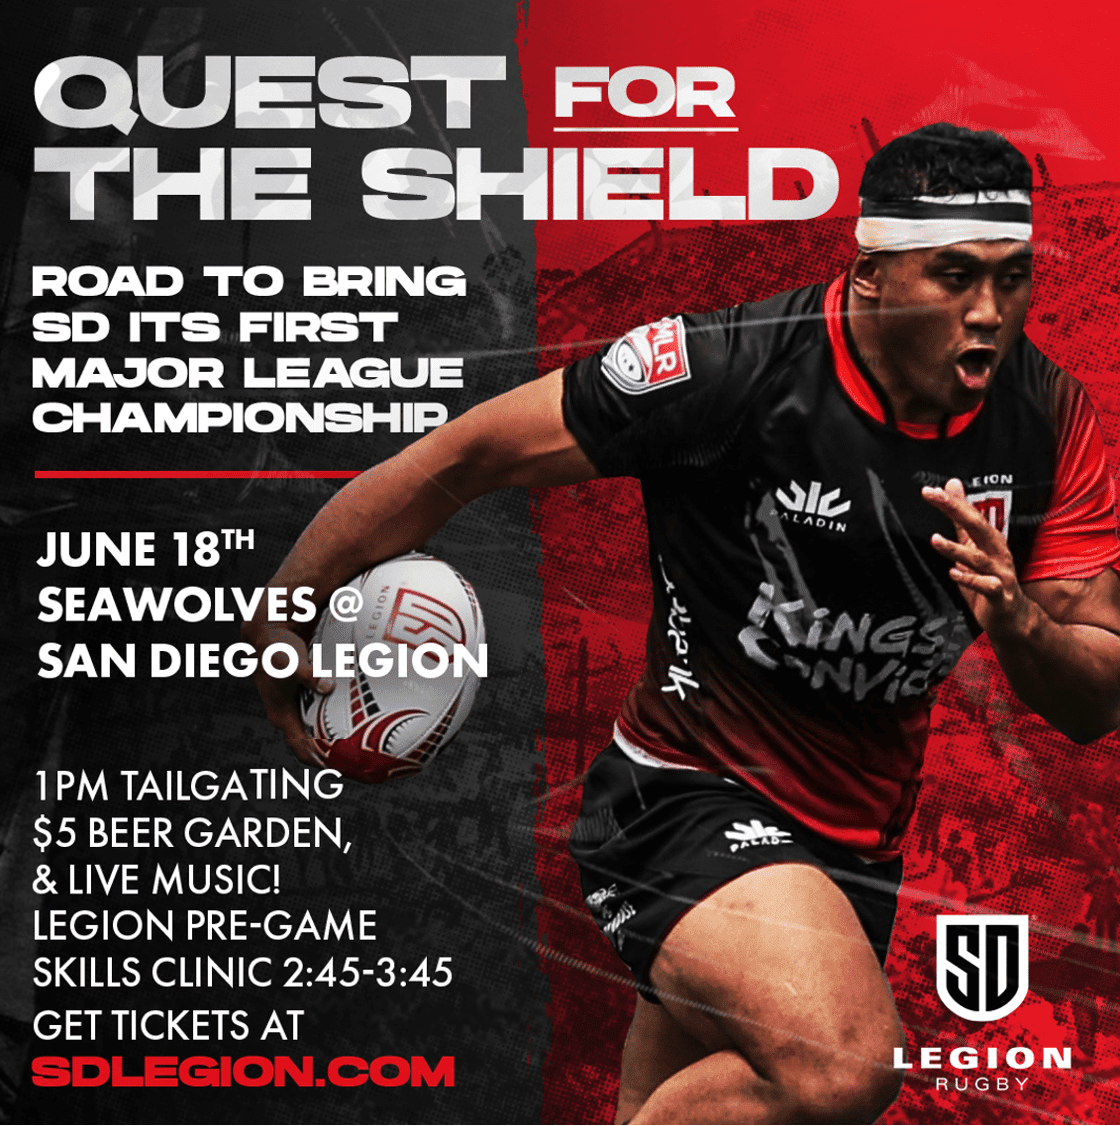 💪 Let's support our own SD LEGION! From youth skills clinics to Teach the Teacher, Legion is committed to the passion of rugby for all ages. Let's show up for them in return -- Nab your tickets for this Sunday's battle via sdlegion.com #socalyouthrugby #rugby